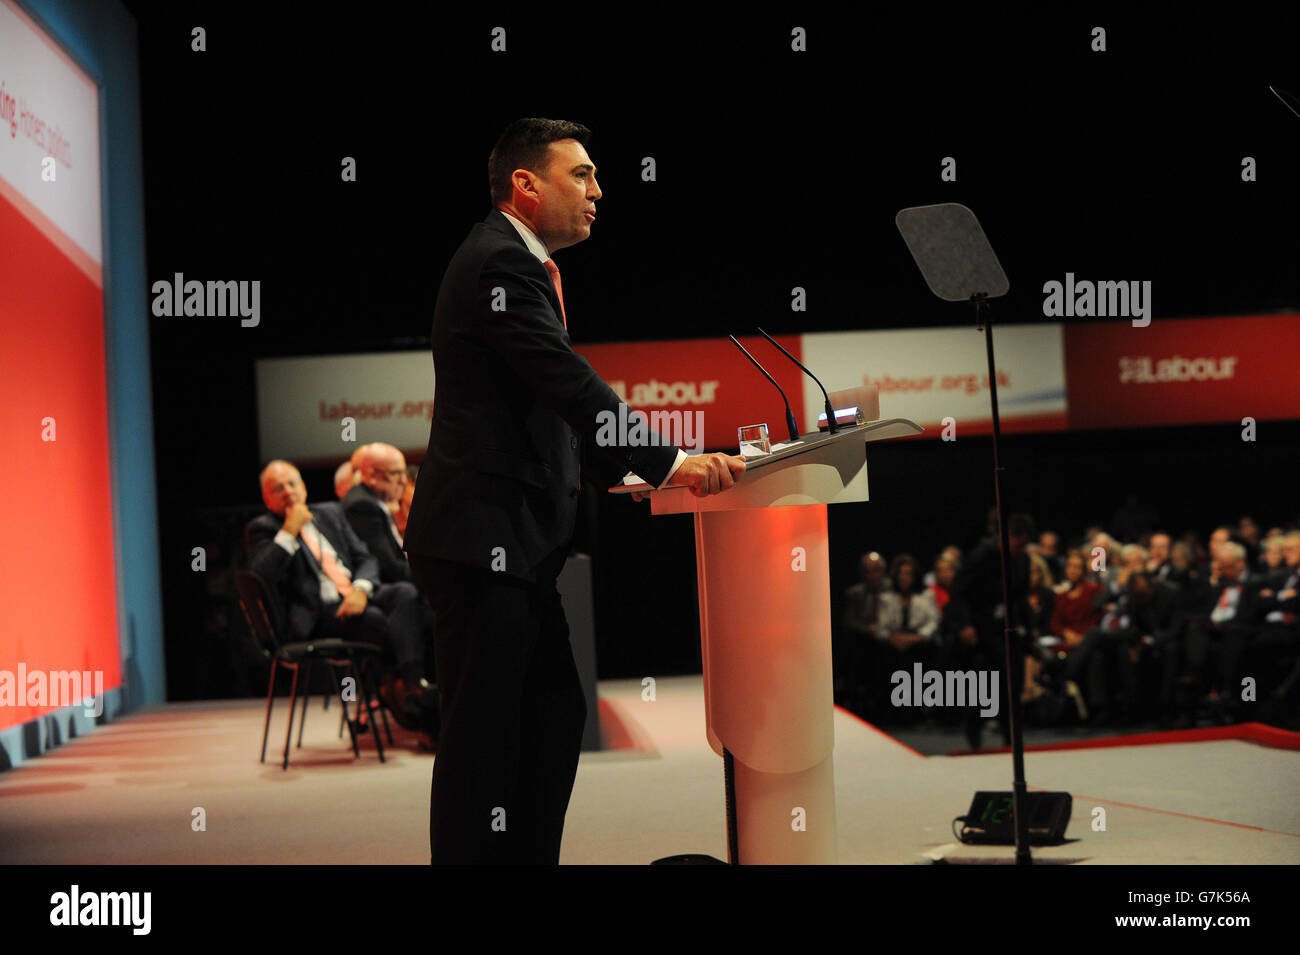 Andy Burnham MP, shadow home secretary, speaking on the theme of 'Stronger, Safer Communities'. Stock Photo